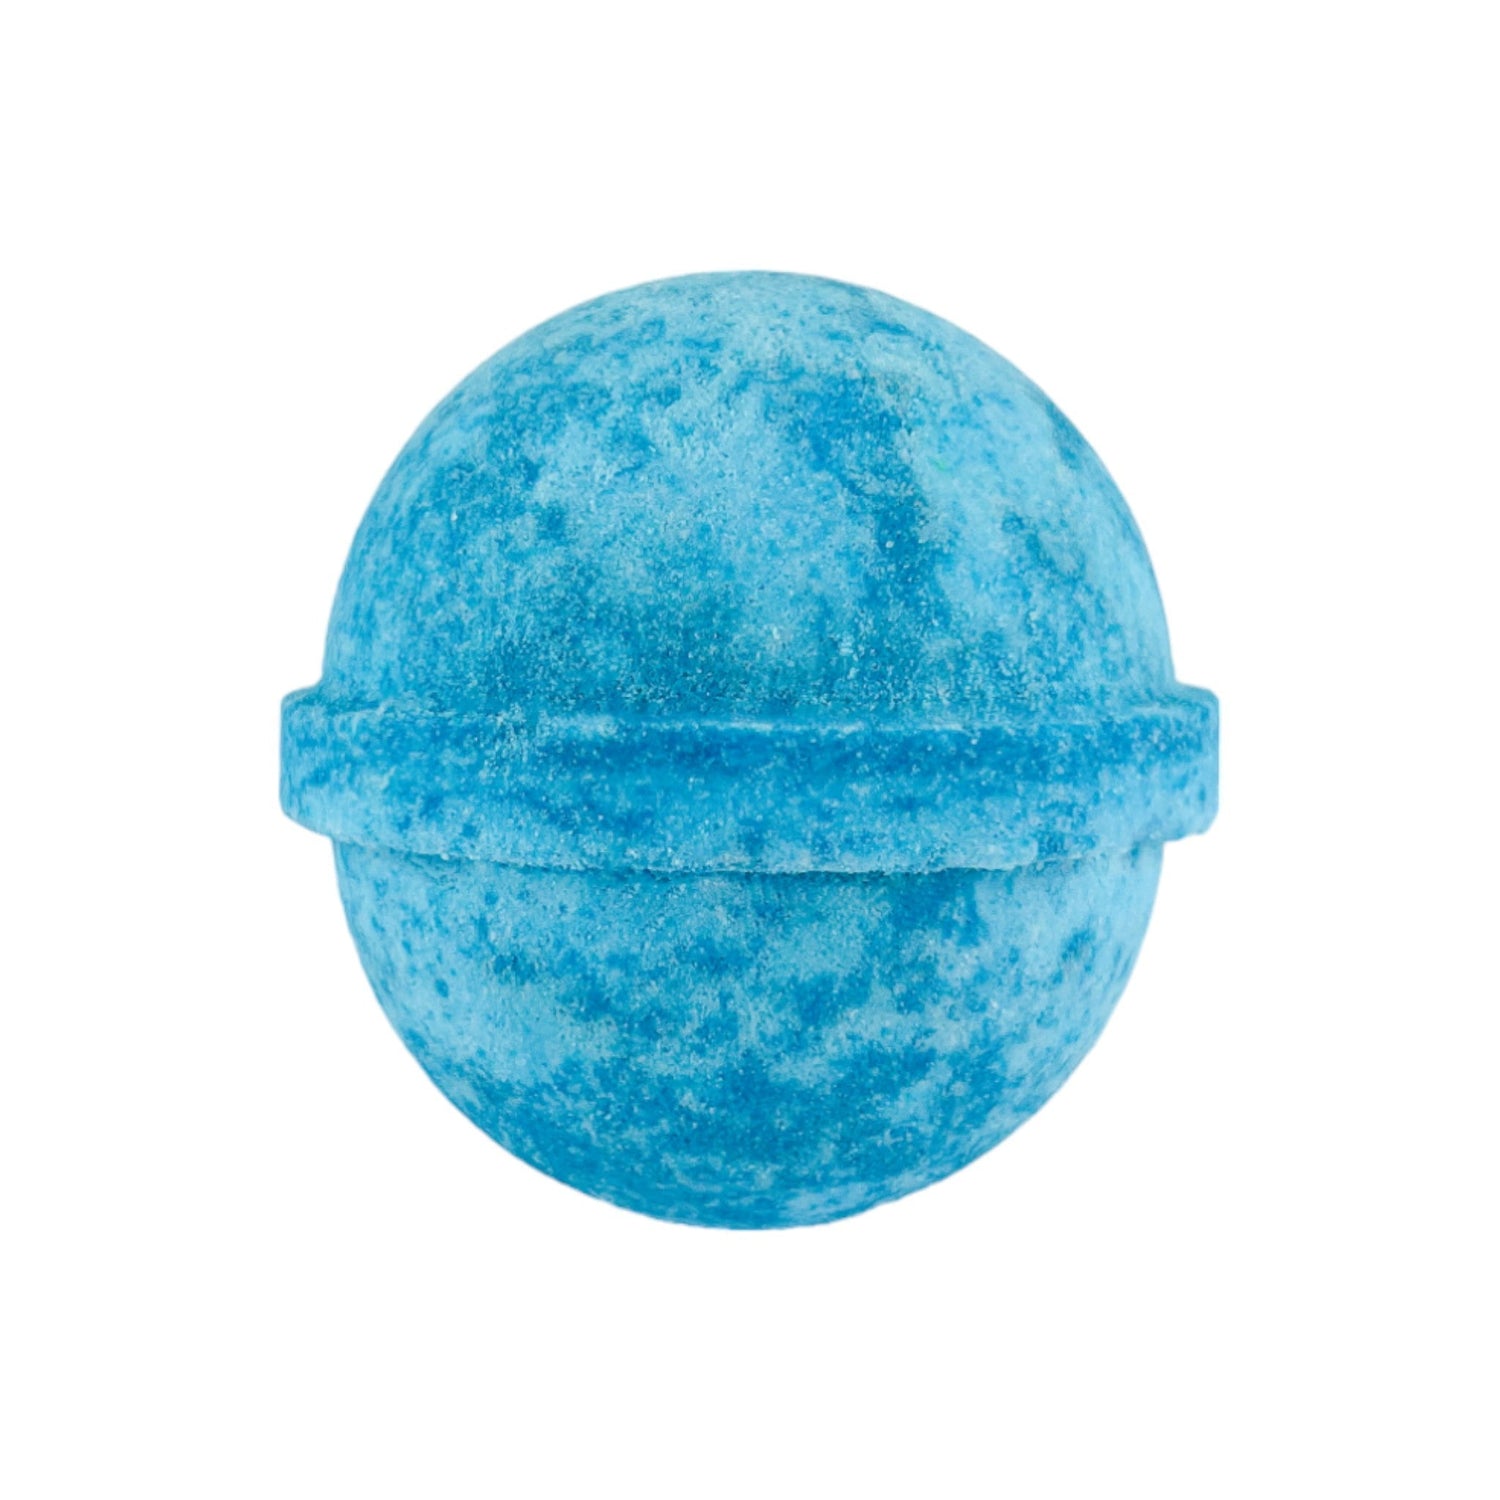 The Perfect Man Bath Bomb -Large - Old Town Soap Co.